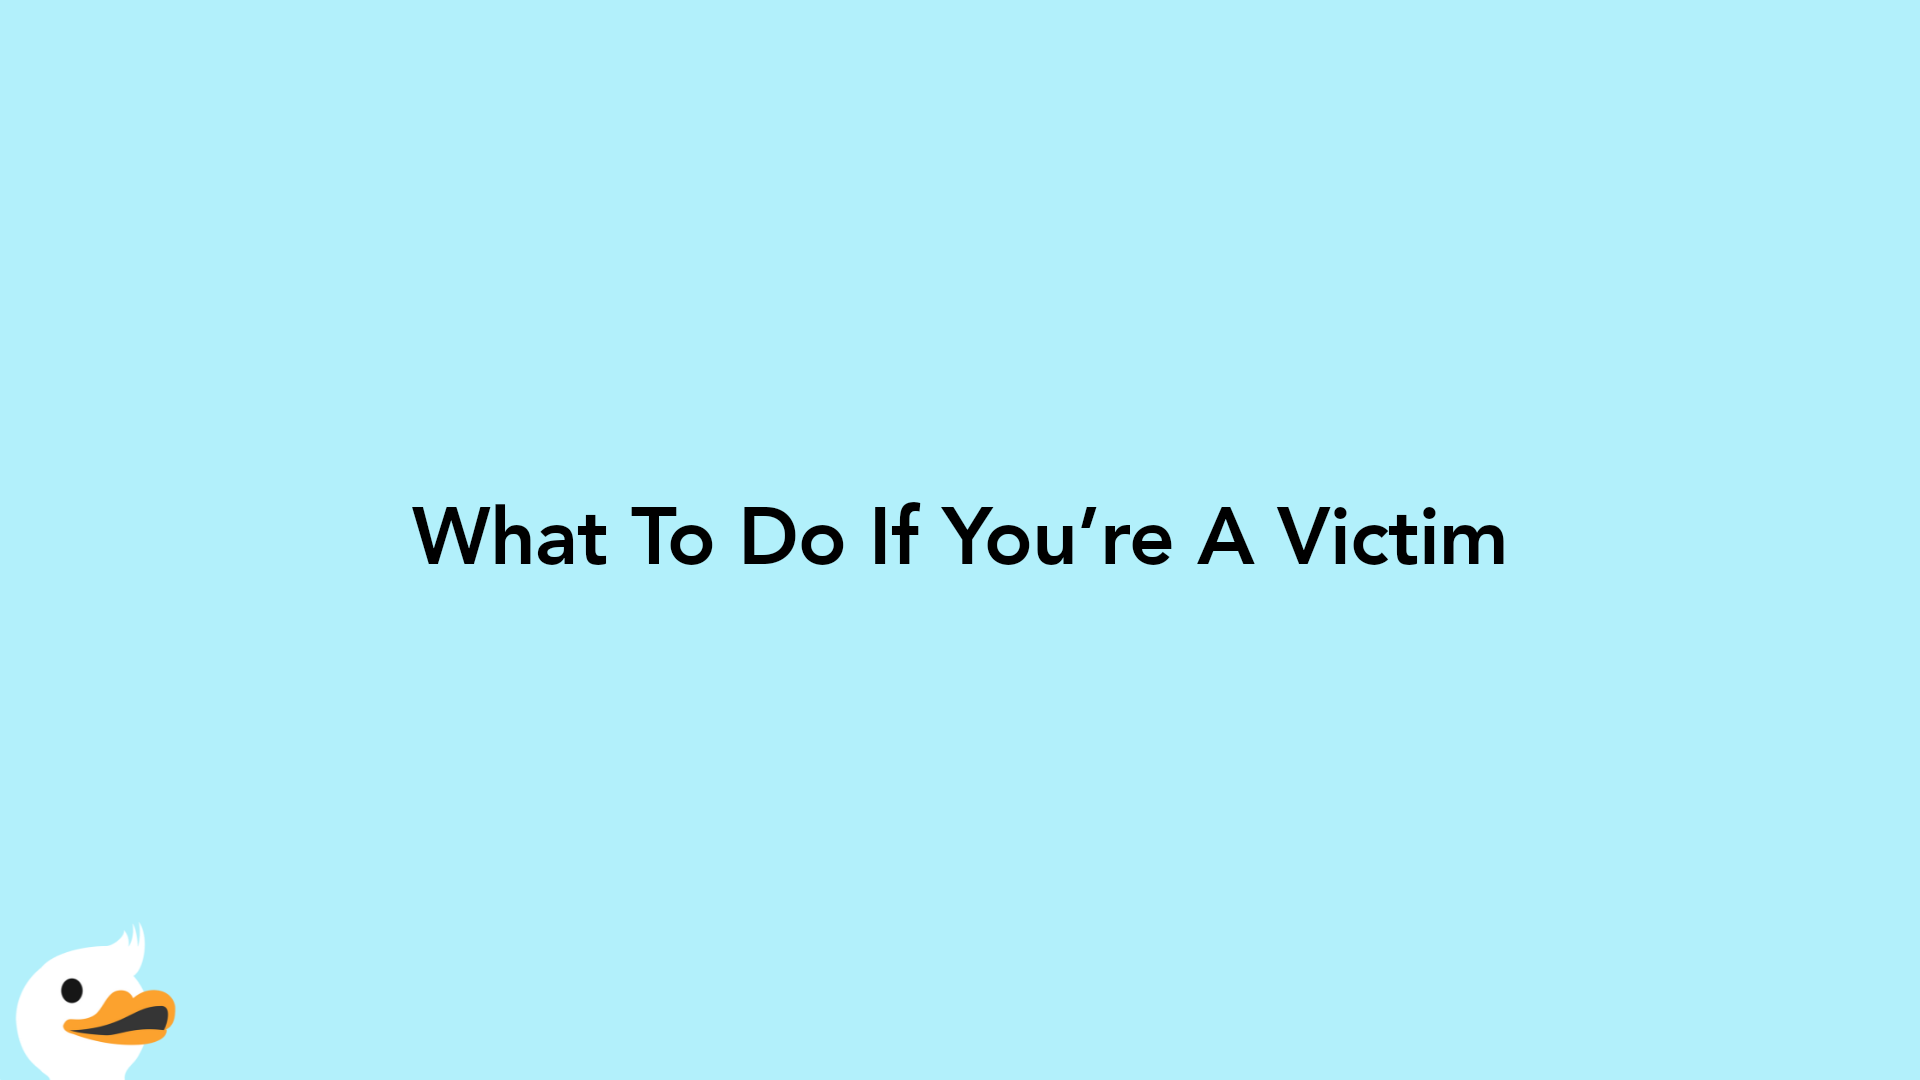 What To Do If You’re A Victim